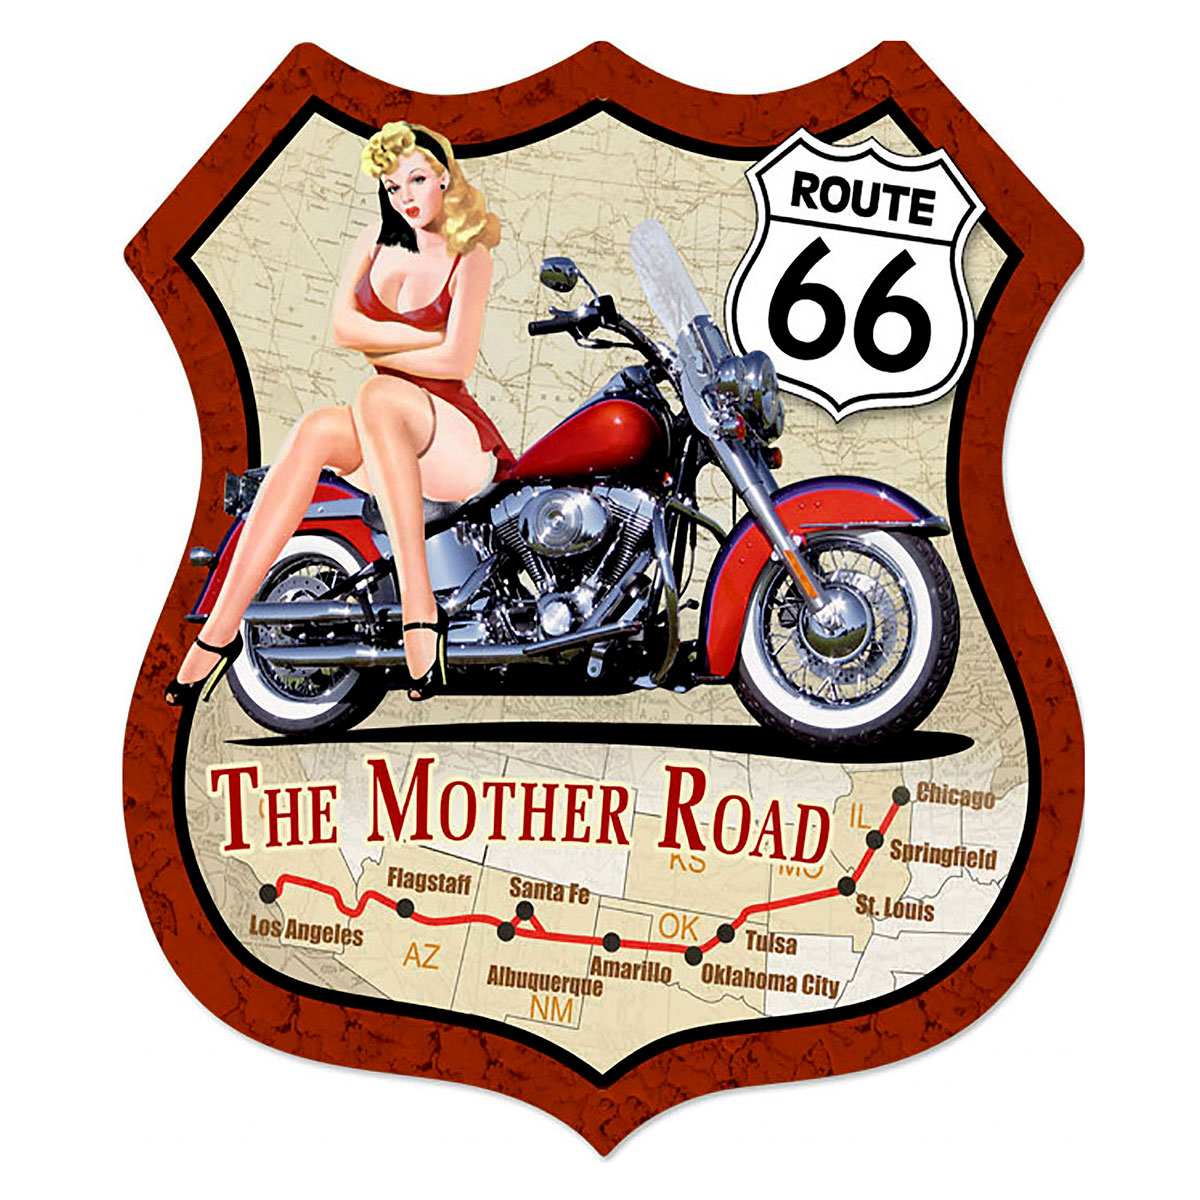 Ecusson pin up mother road